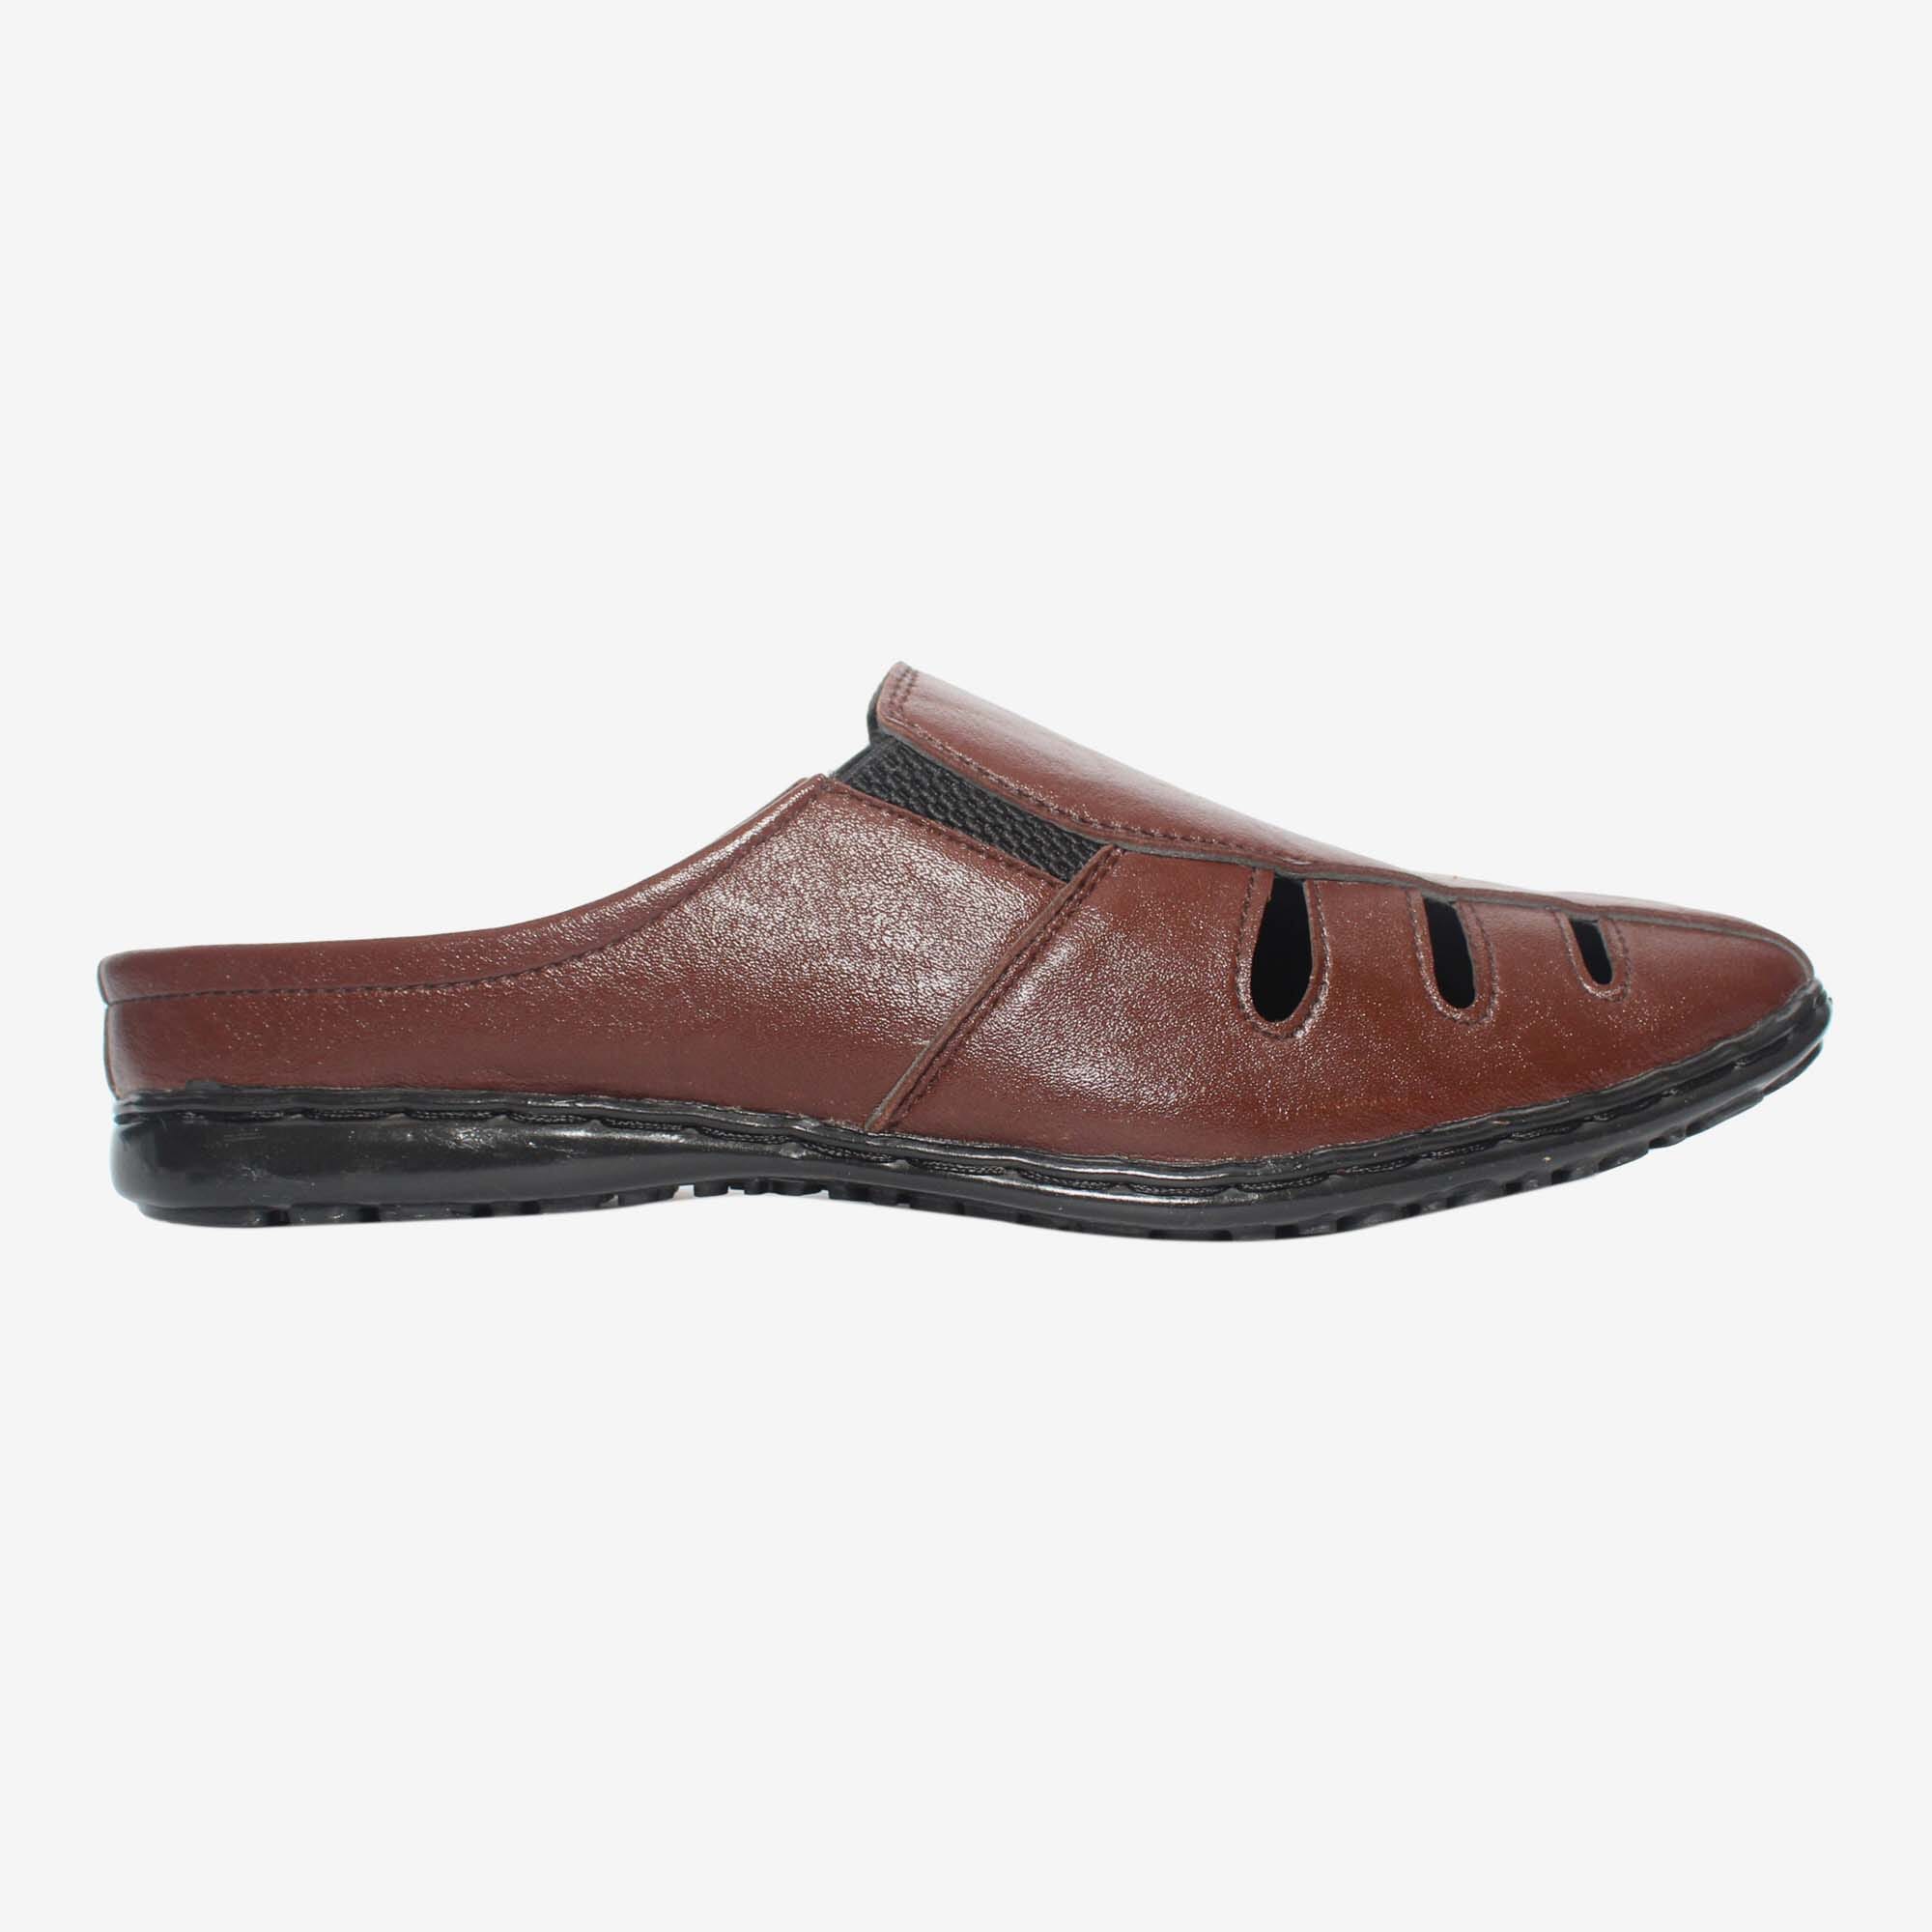 Bkolouuoe Shoe Leather Wing Tip Shoes for Men Mens Nepal